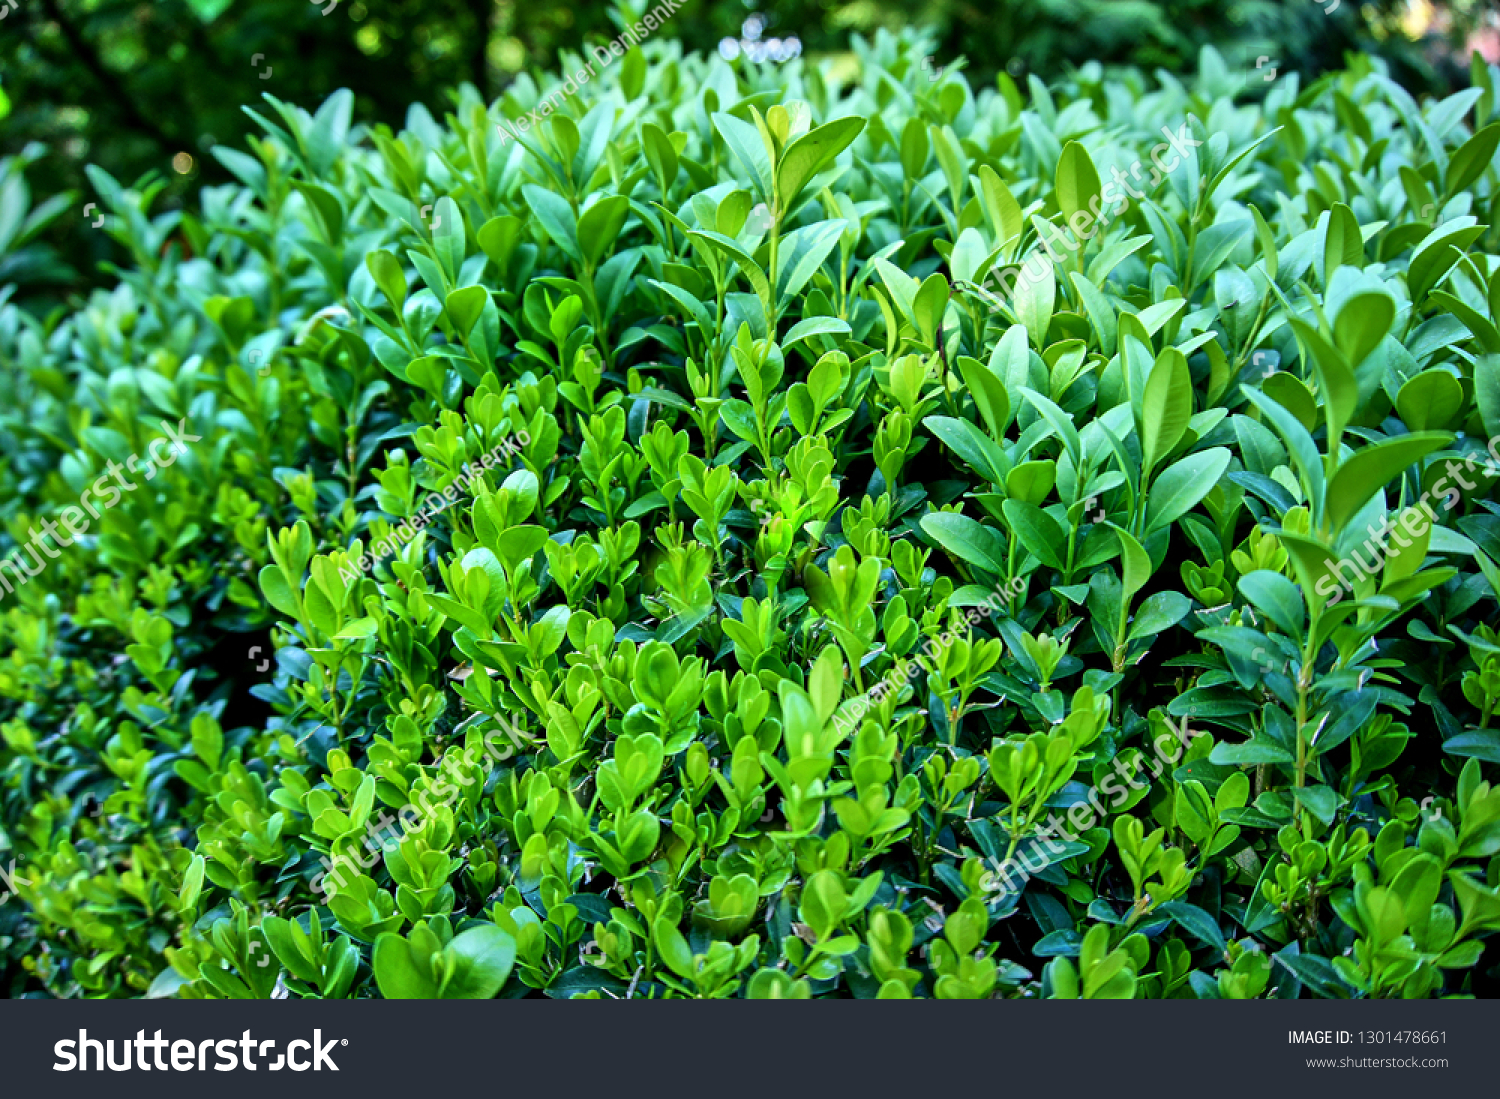 European boxwood, European boxwood or boxwood, is a type of evergreen shrub. Close-up. Selective focus. Green branches of boxwood as texture for design. #1301478661